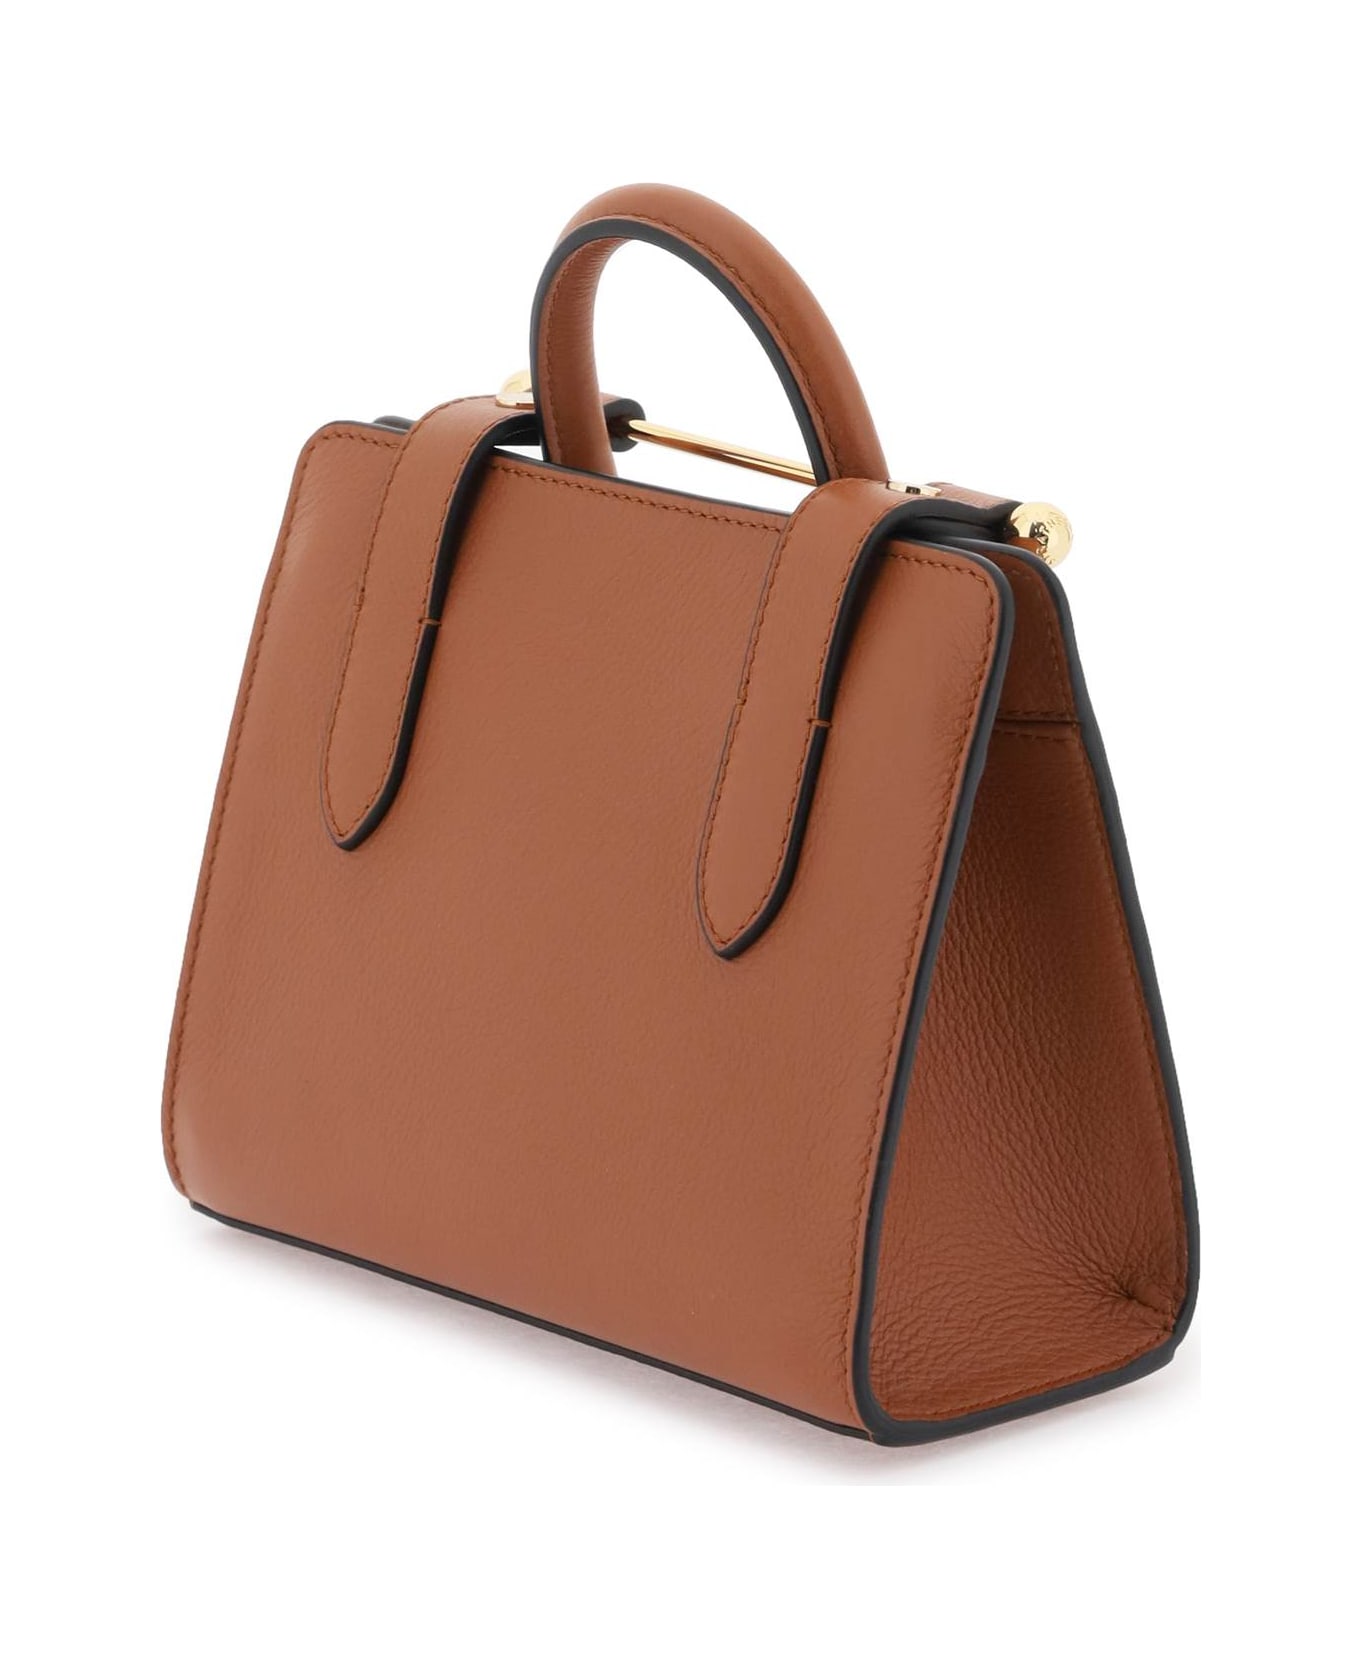 Strathberry Nano Tote Leather Bag - CHESTNUT (Brown) トートバッグ